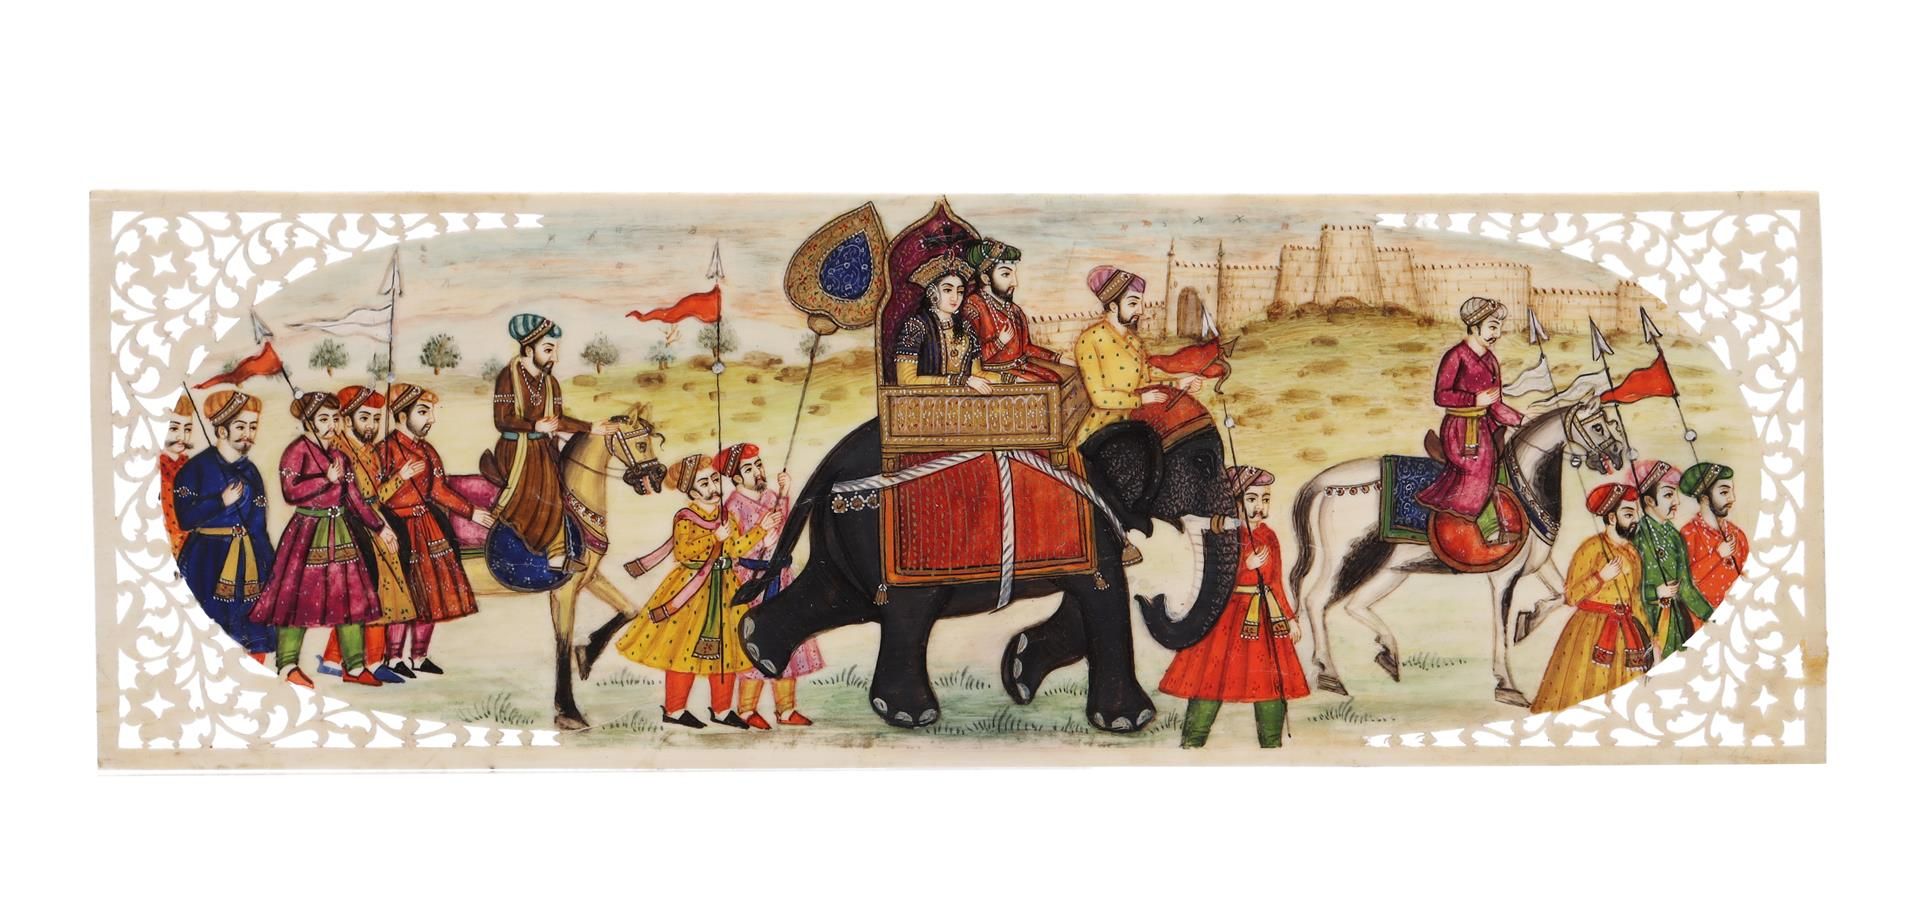 Hand-painted depiction of a procession